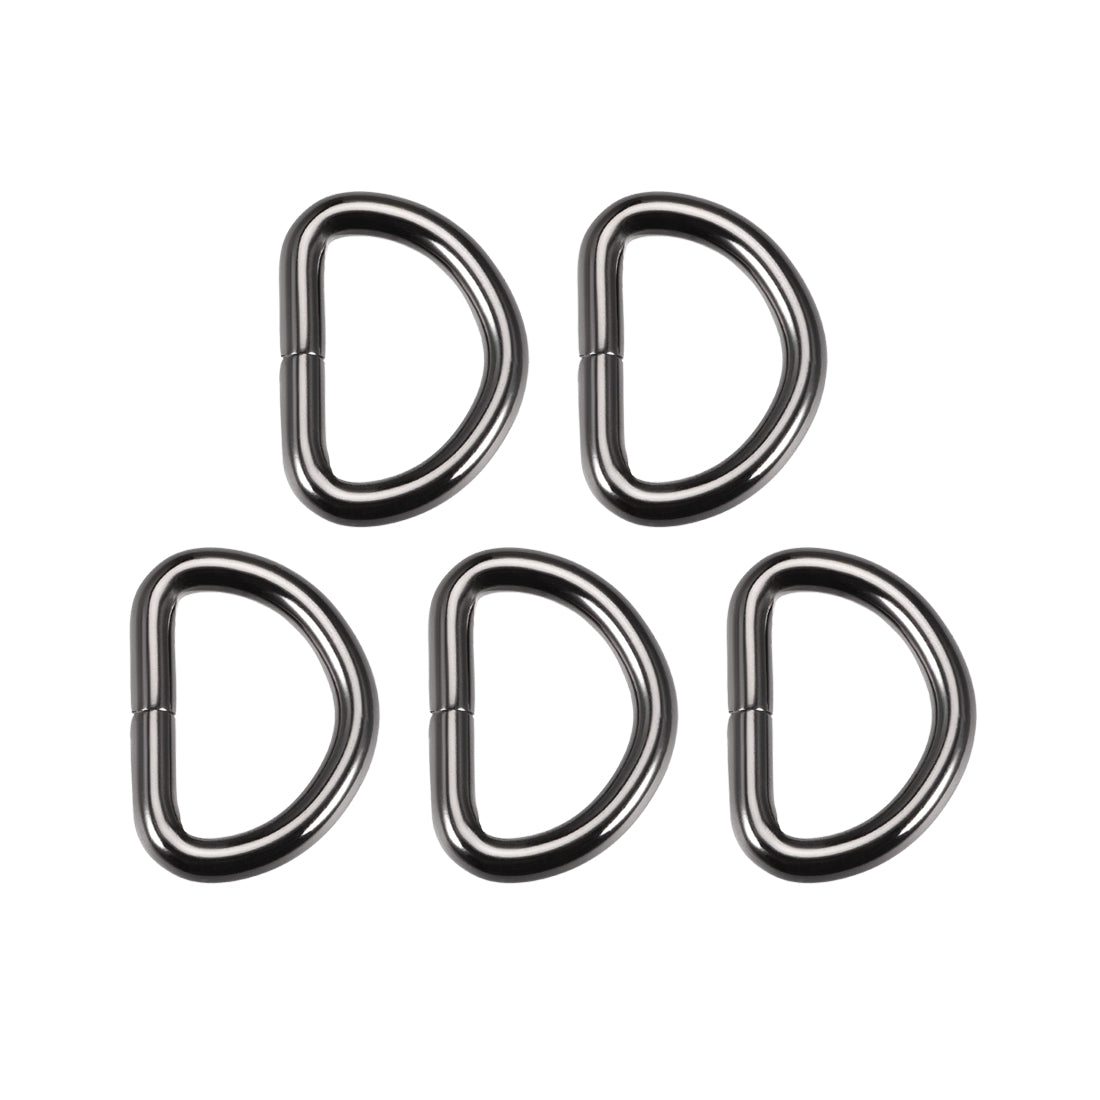 uxcell Uxcell 5 Pcs D Ring Buckle 1 Inch Metal Semi-Circular D-Rings Black for Hardware Bags Belts Craft DIY Accessories